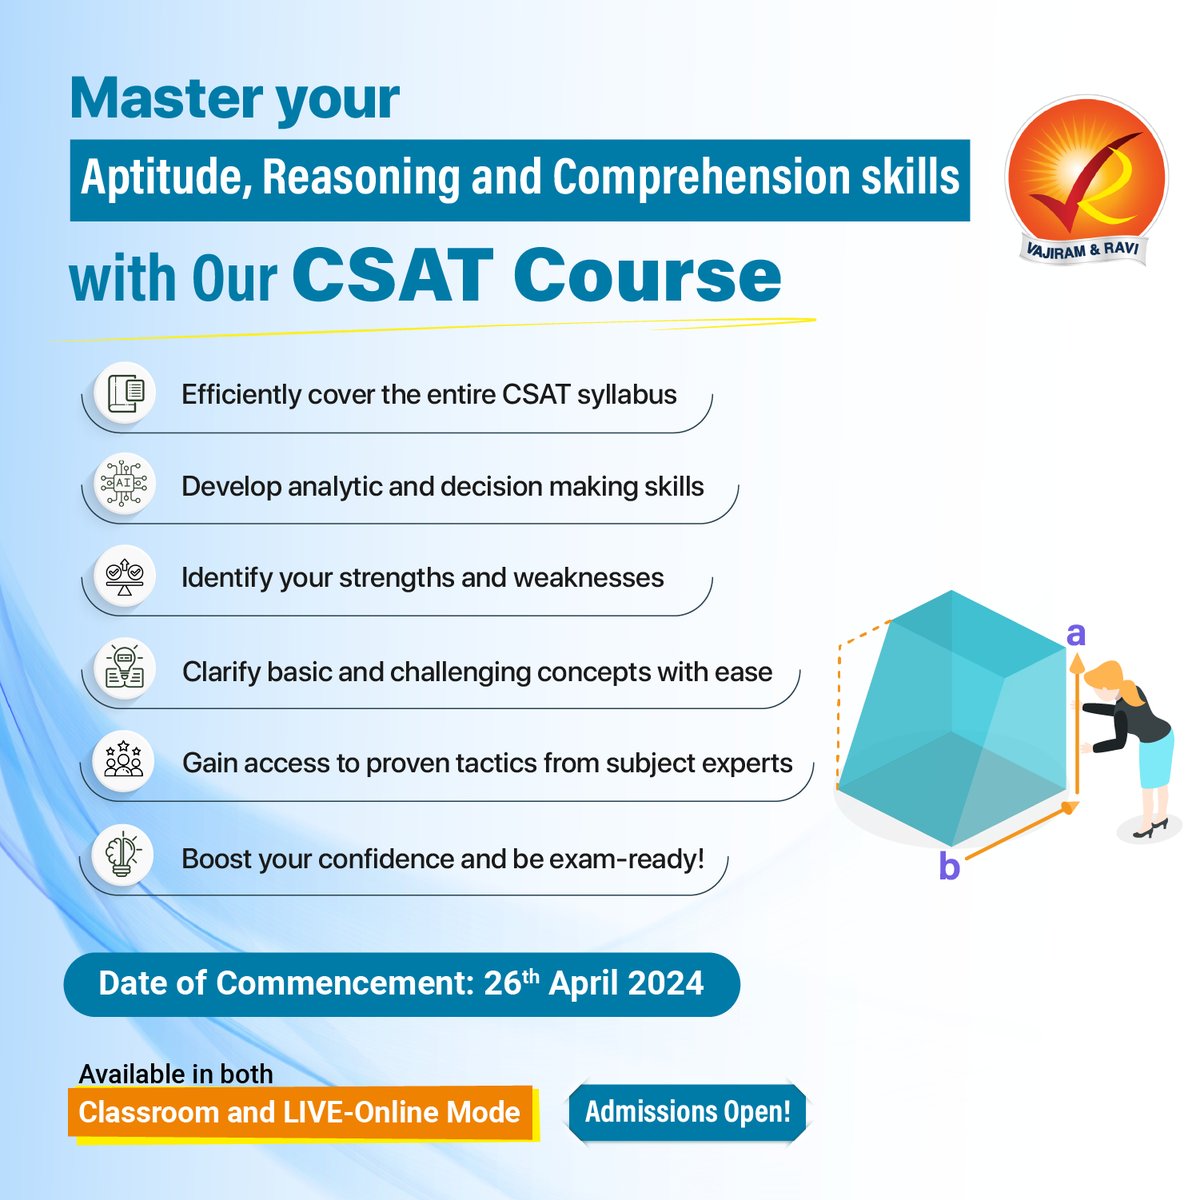 Sharpen your comprehensive, logical, decision making skills with our CSAT Course for UPSC 2025 with the best Faculty and Study Materials. To Learn More, please visit - bit.ly/vajiram-csat-c… #csat #upsc #upscaspirant #upscexam #upscprelims#upscias #ias #upsc2025 #prelims2025